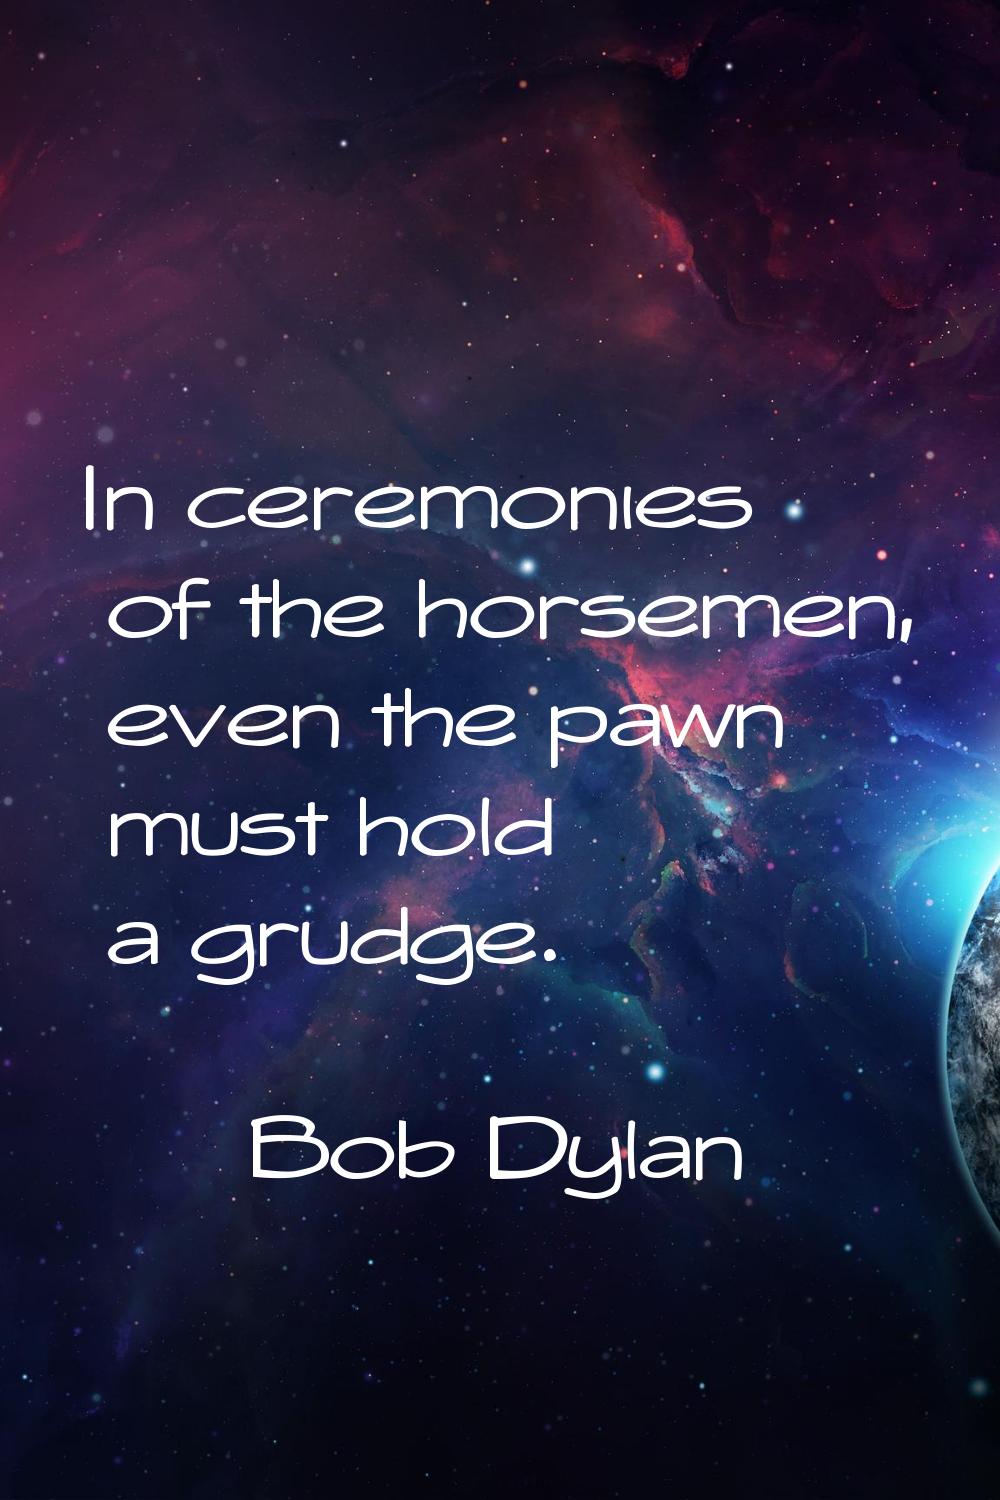 In ceremonies of the horsemen, even the pawn must hold a grudge.